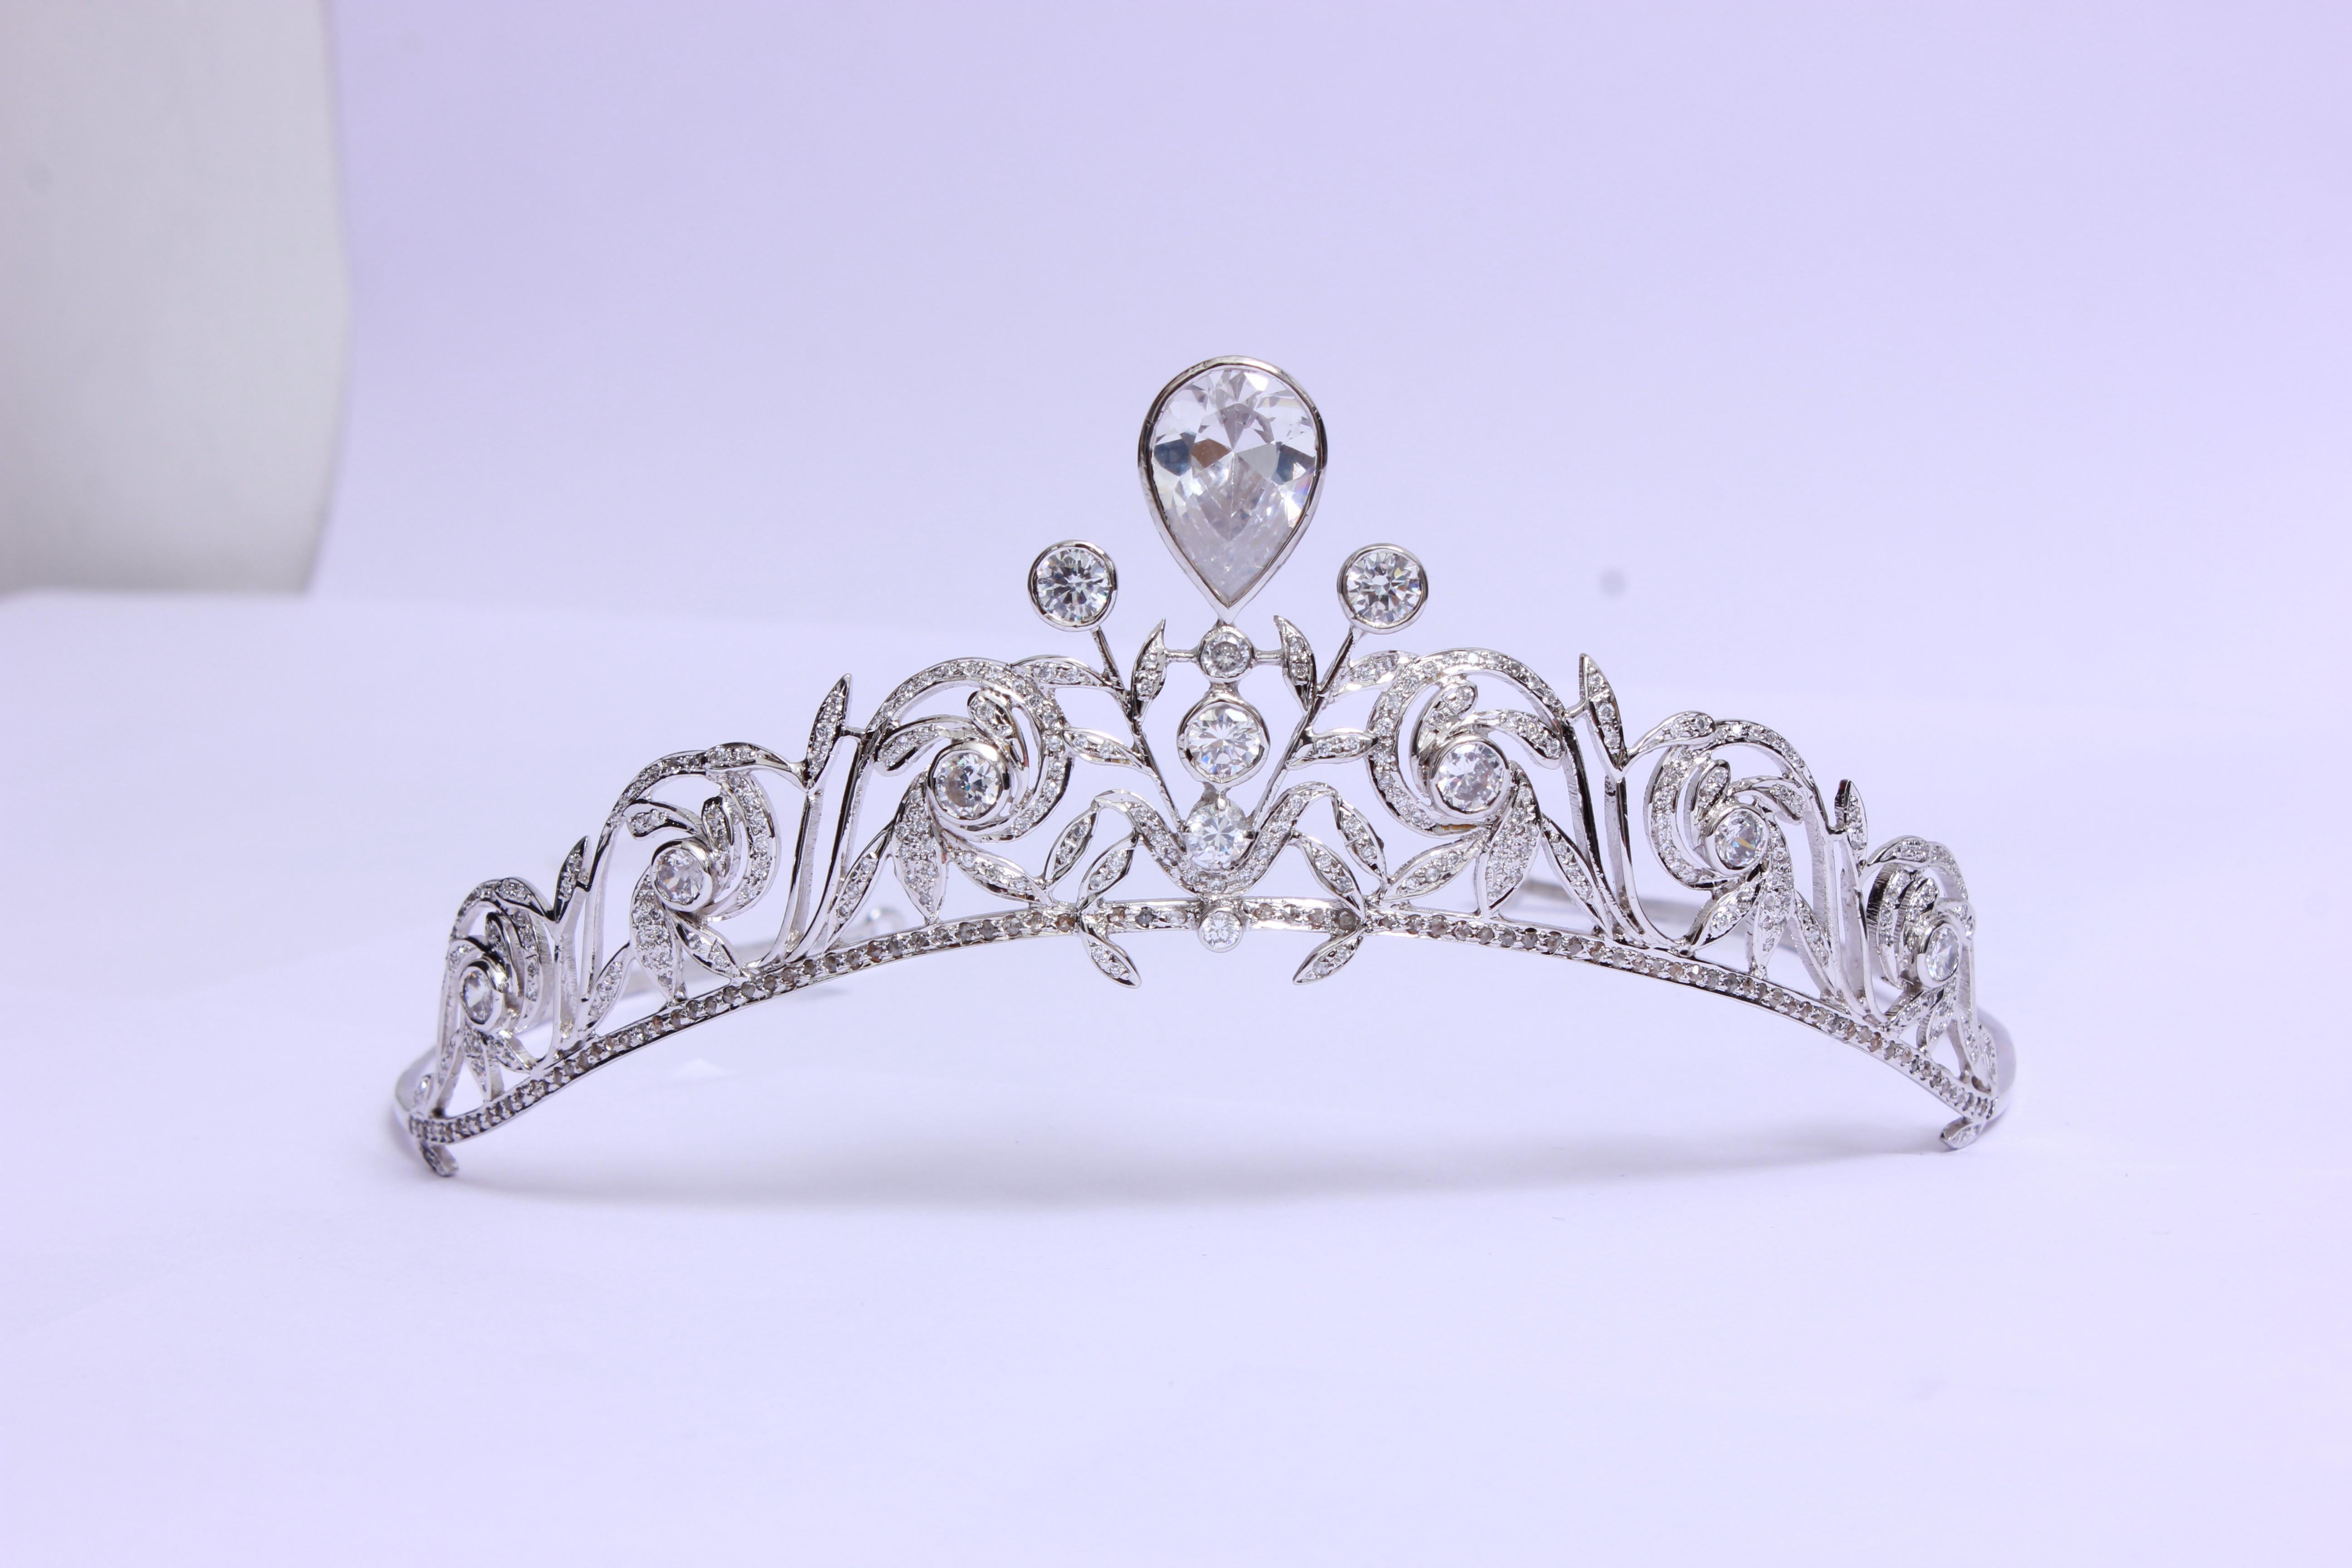 Taille rose Elegance Natural pave diamonds topaz sterling silver tiara head accessory band en vente